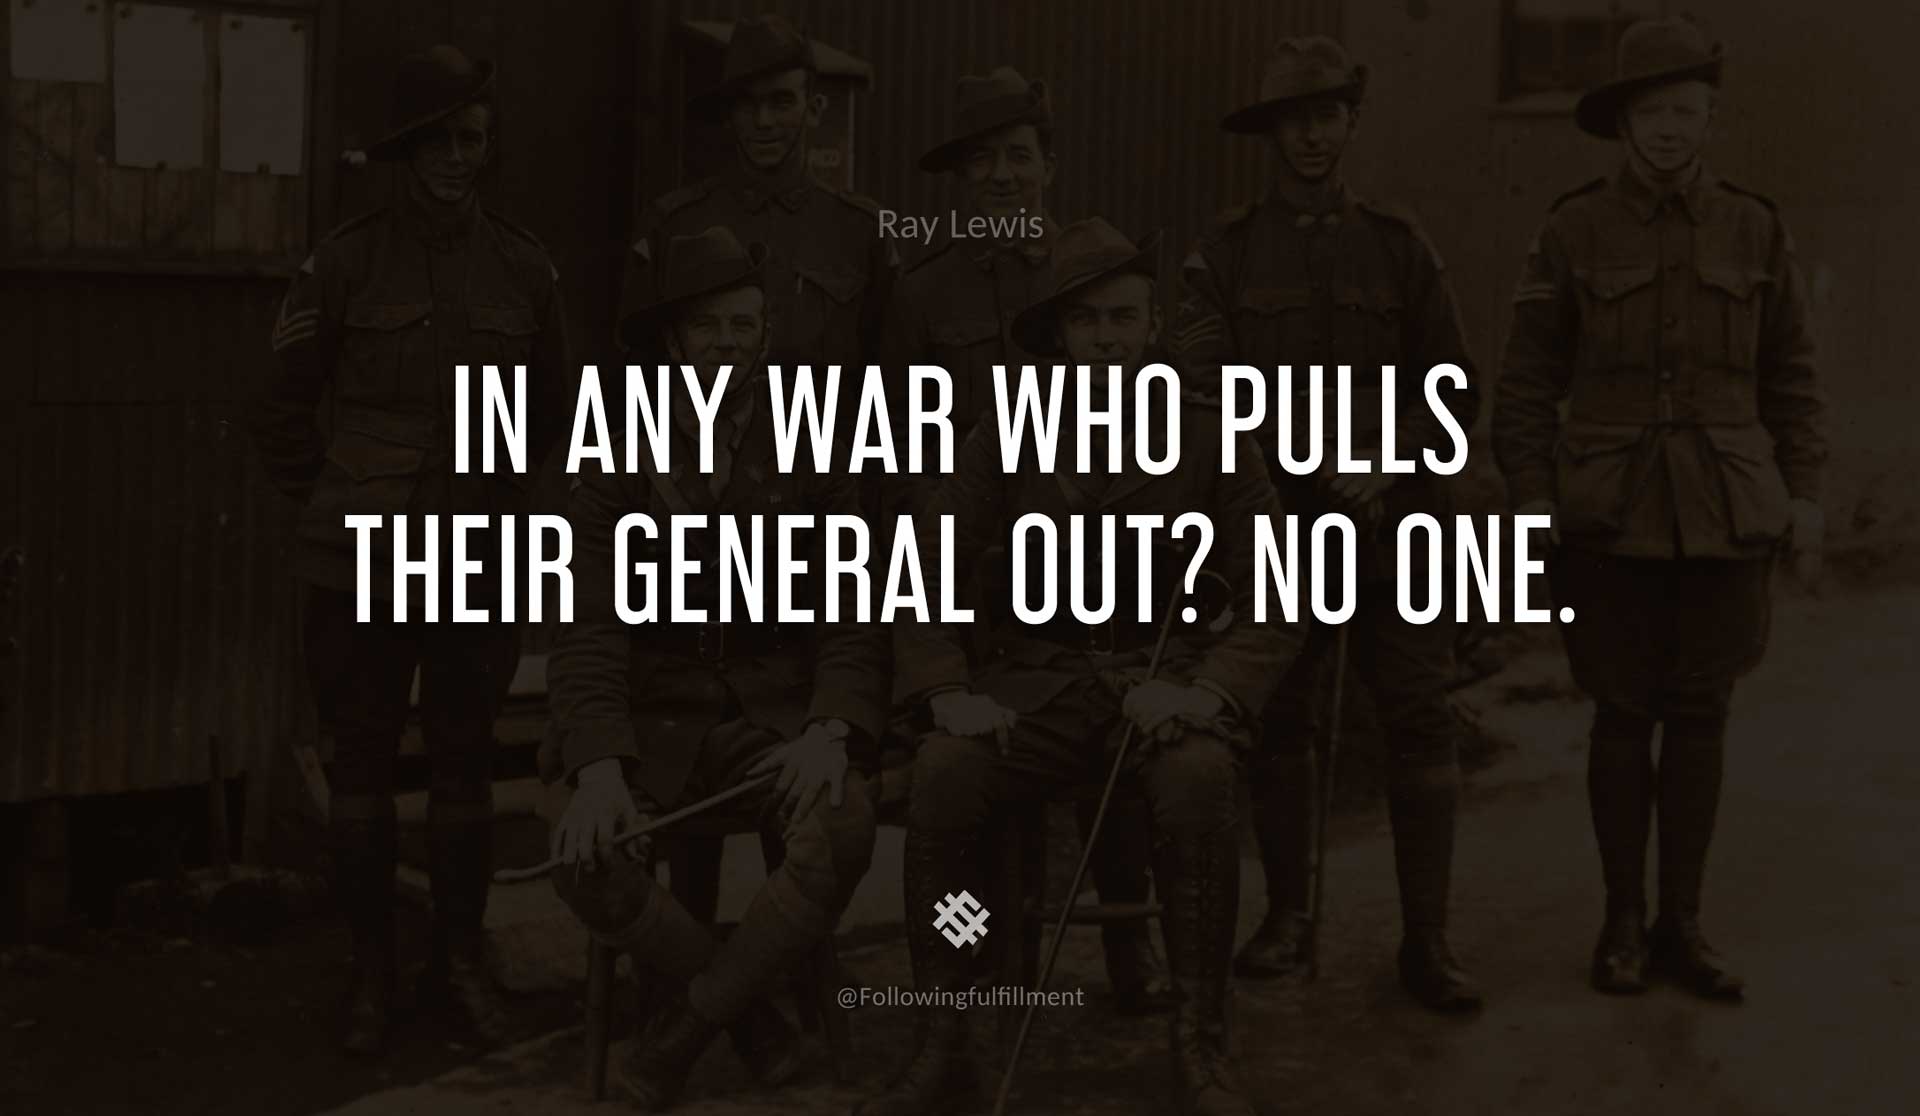 In-any-war-who-pulls-their-general-out--No-one.-RAY-LEWIS-Quote.jpg